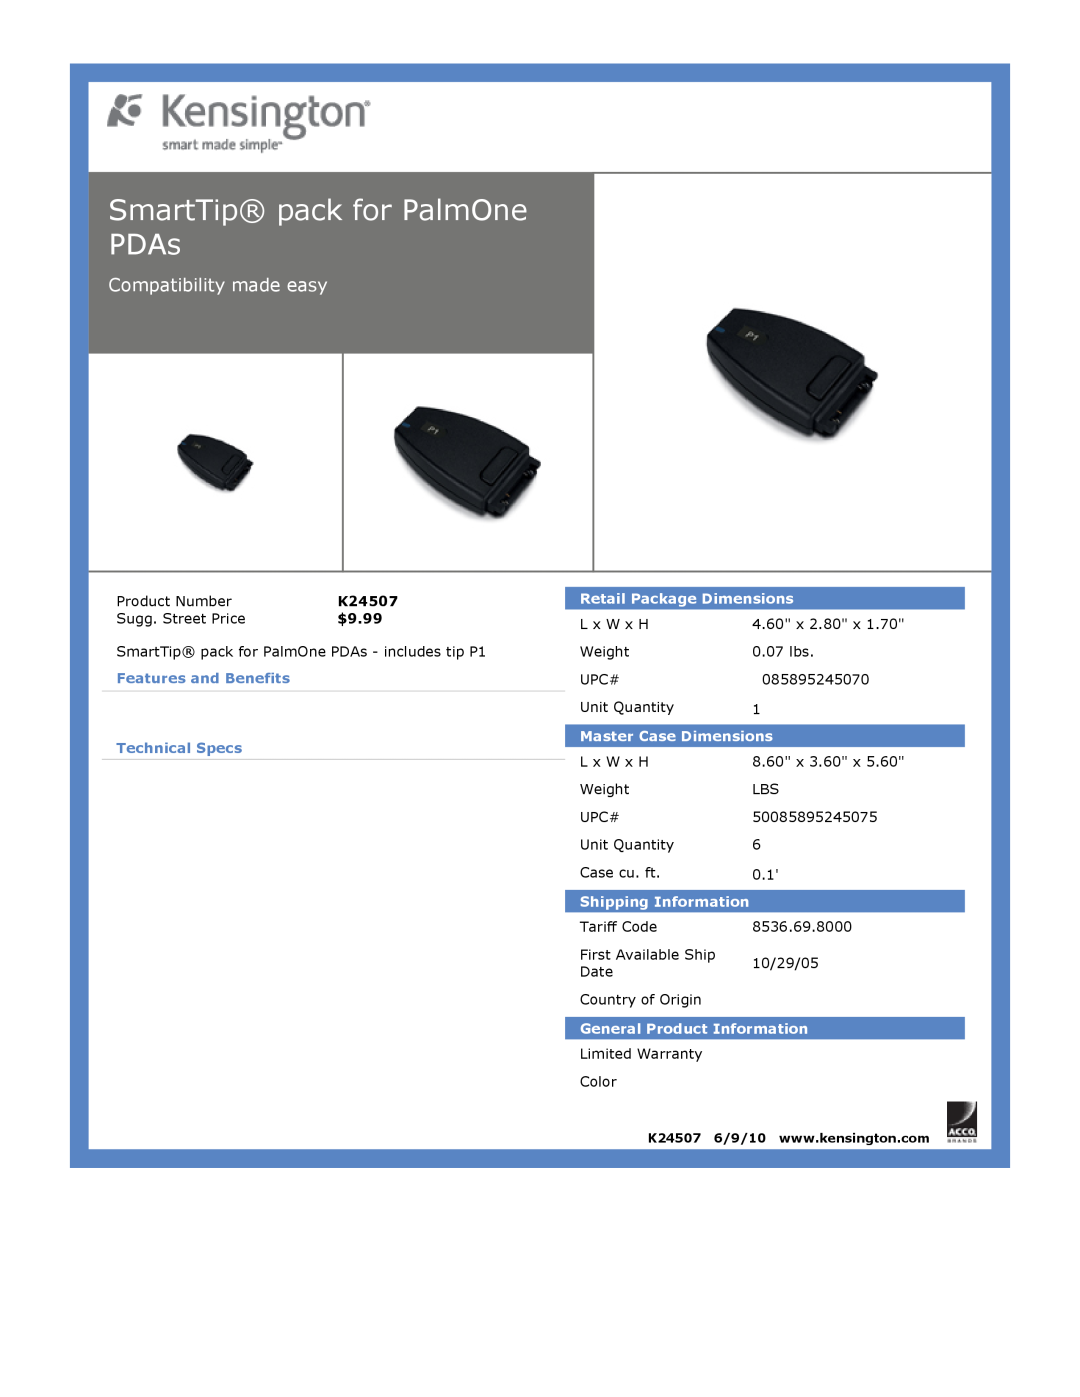 Kensington EU64325 SmartTip pack for PalmOne PDAs, Compatibility made easy, $9.99, Features and Benefits Technical Specs 